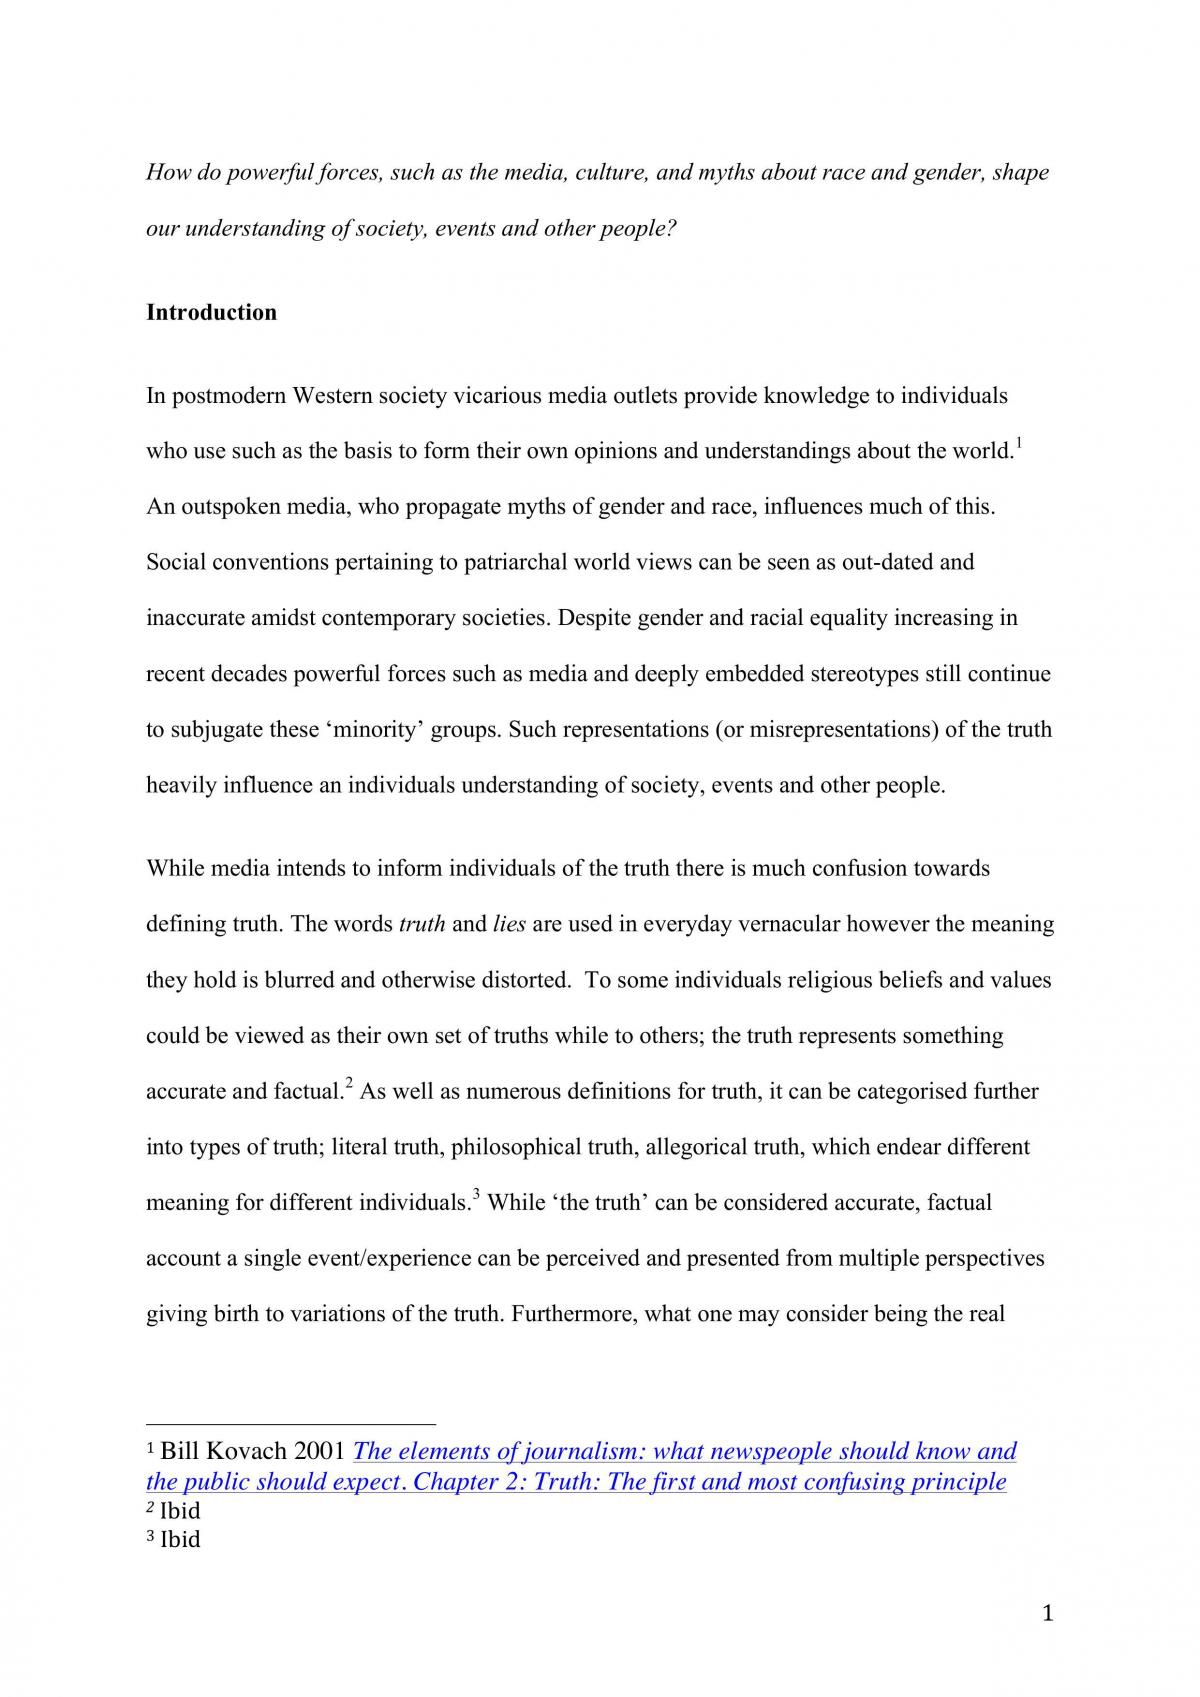 BAR150 Essay Truth and Representation - Page 1